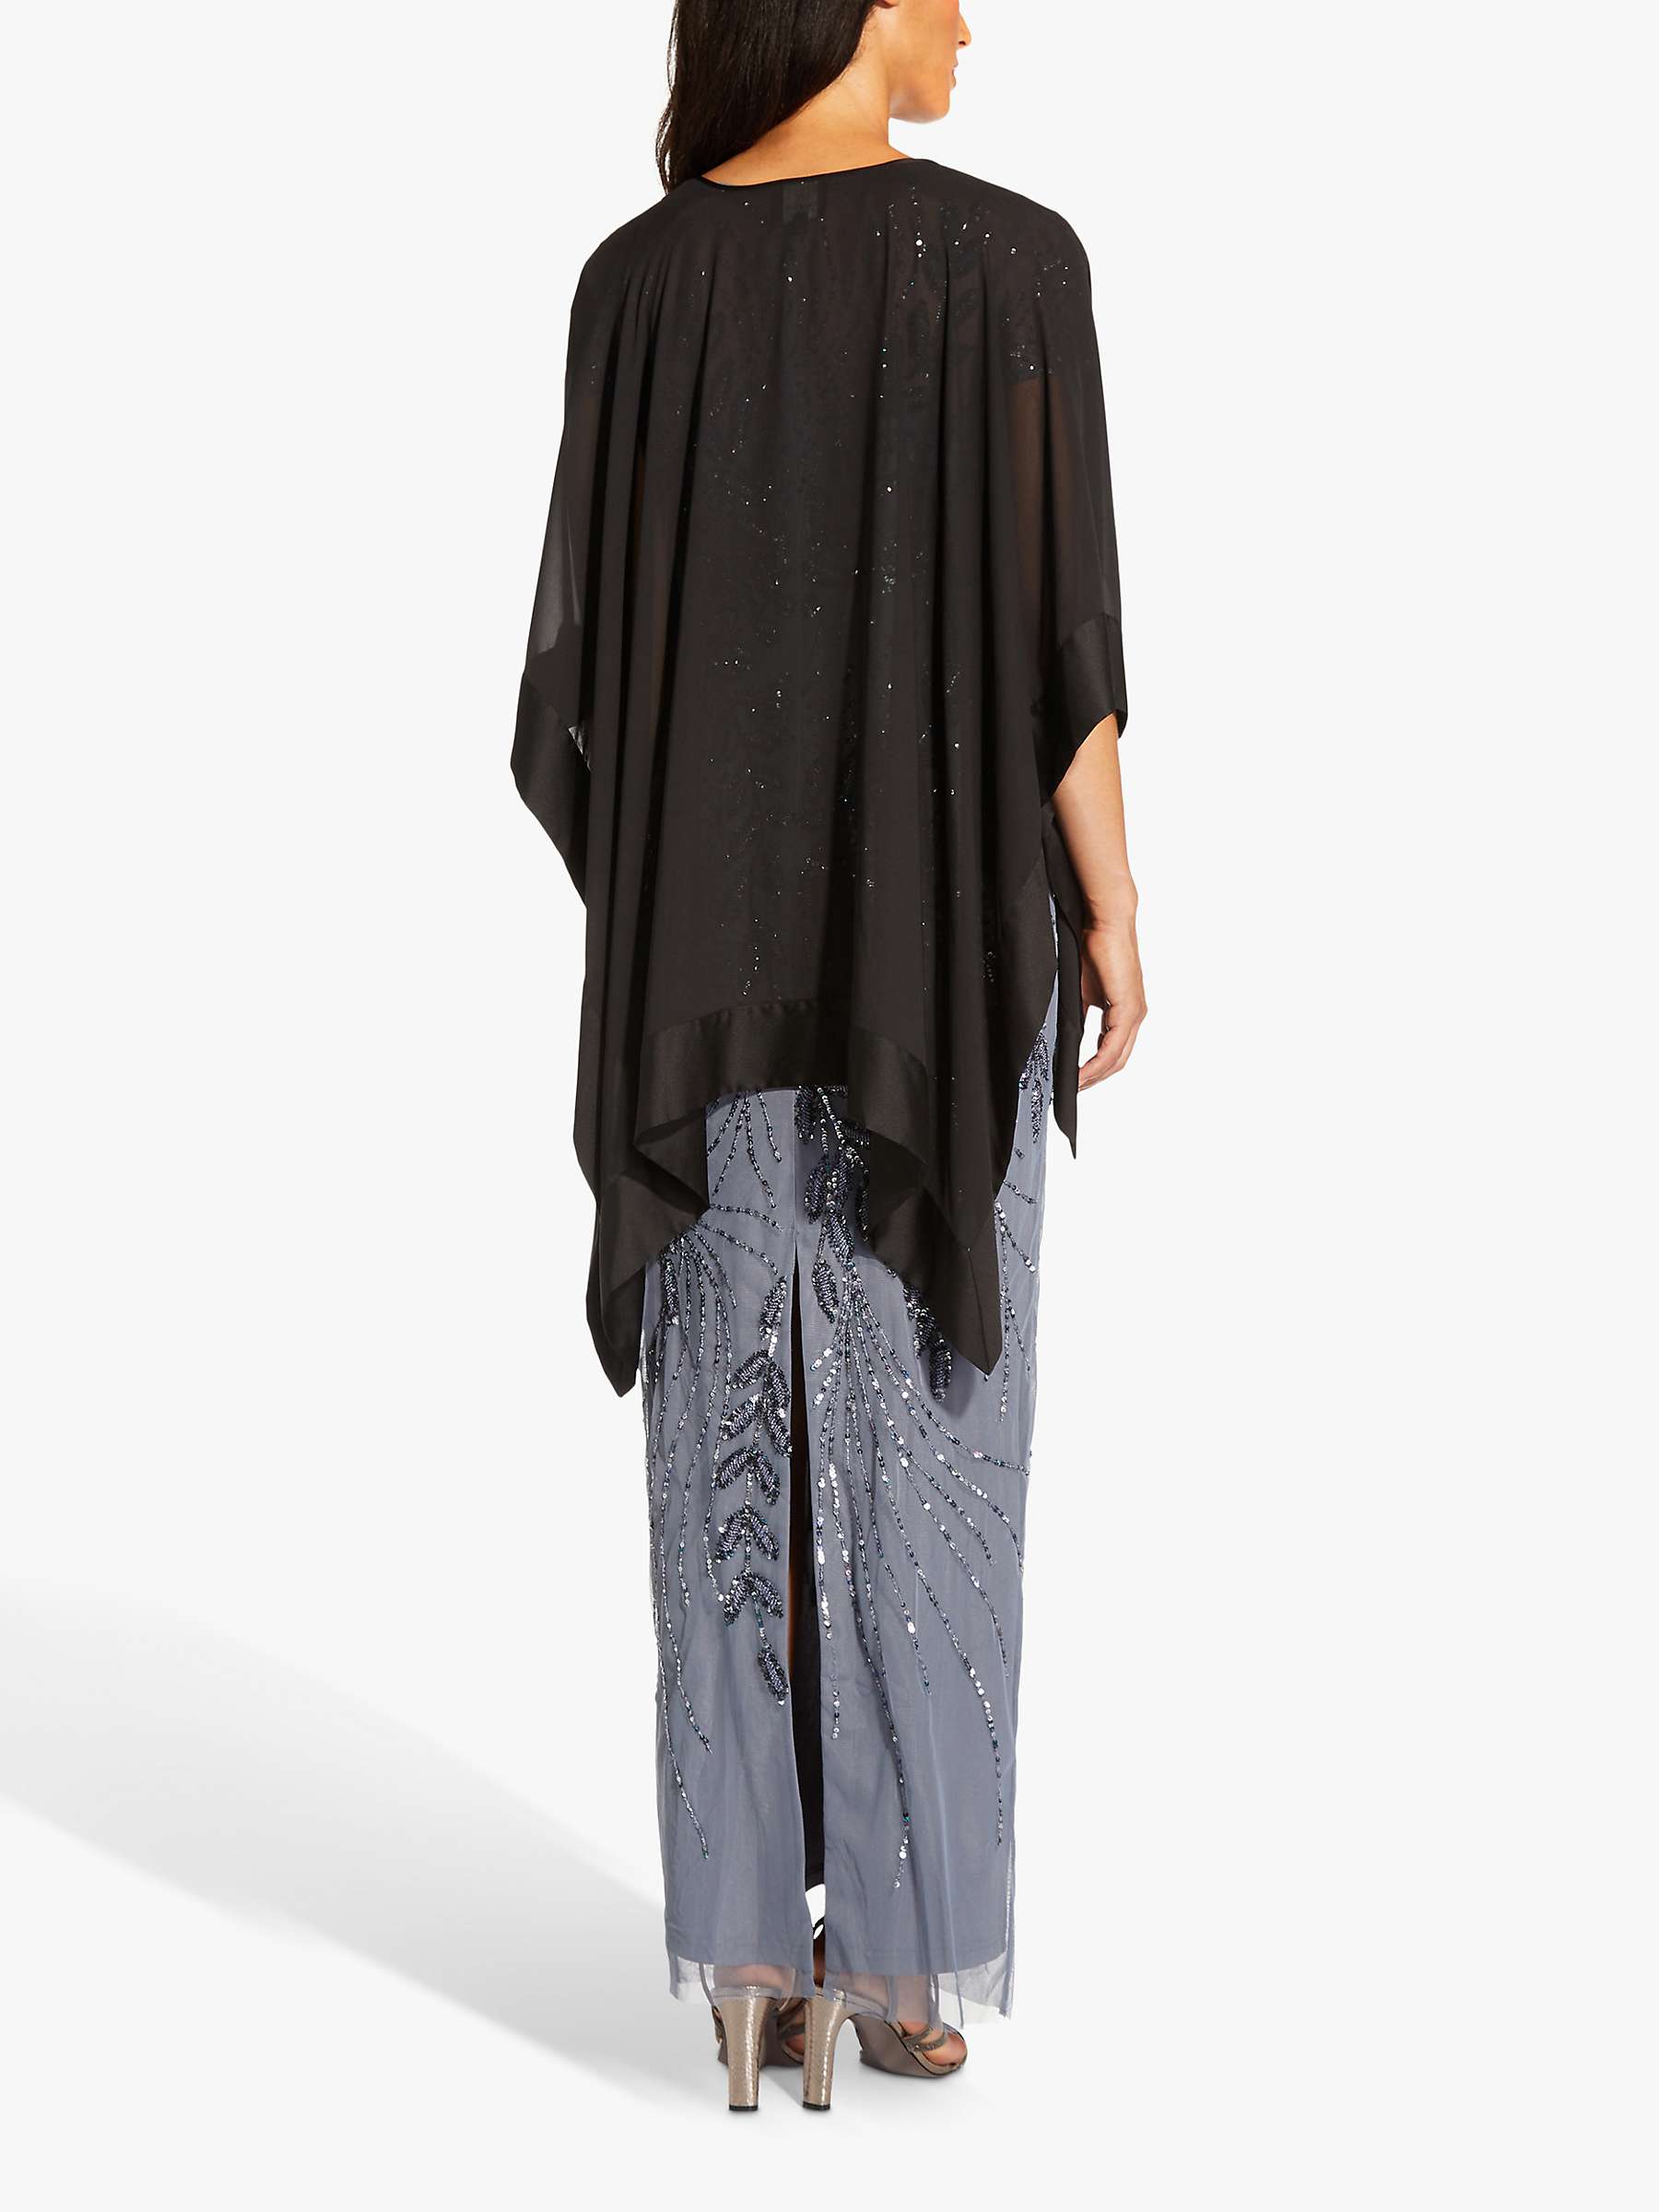 Buy Adrianna Papell Chiffon Cape Cover Up, Black Online at johnlewis.com